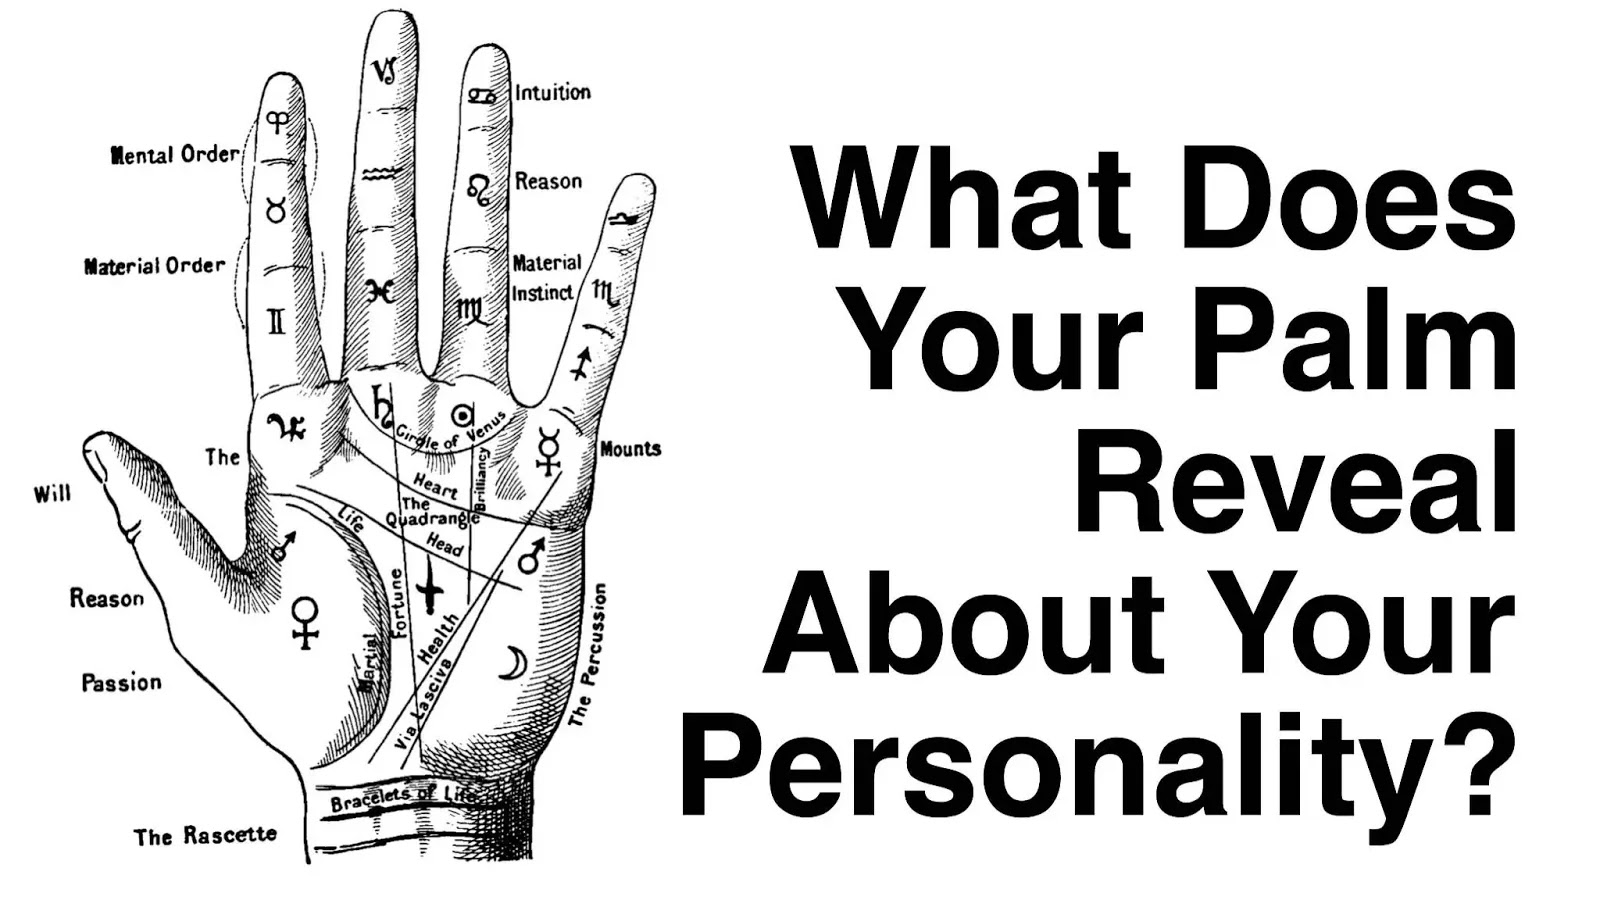 Romantic Woman Or Business Woman? The Palm Of Your Hand Reveals Your True Personality